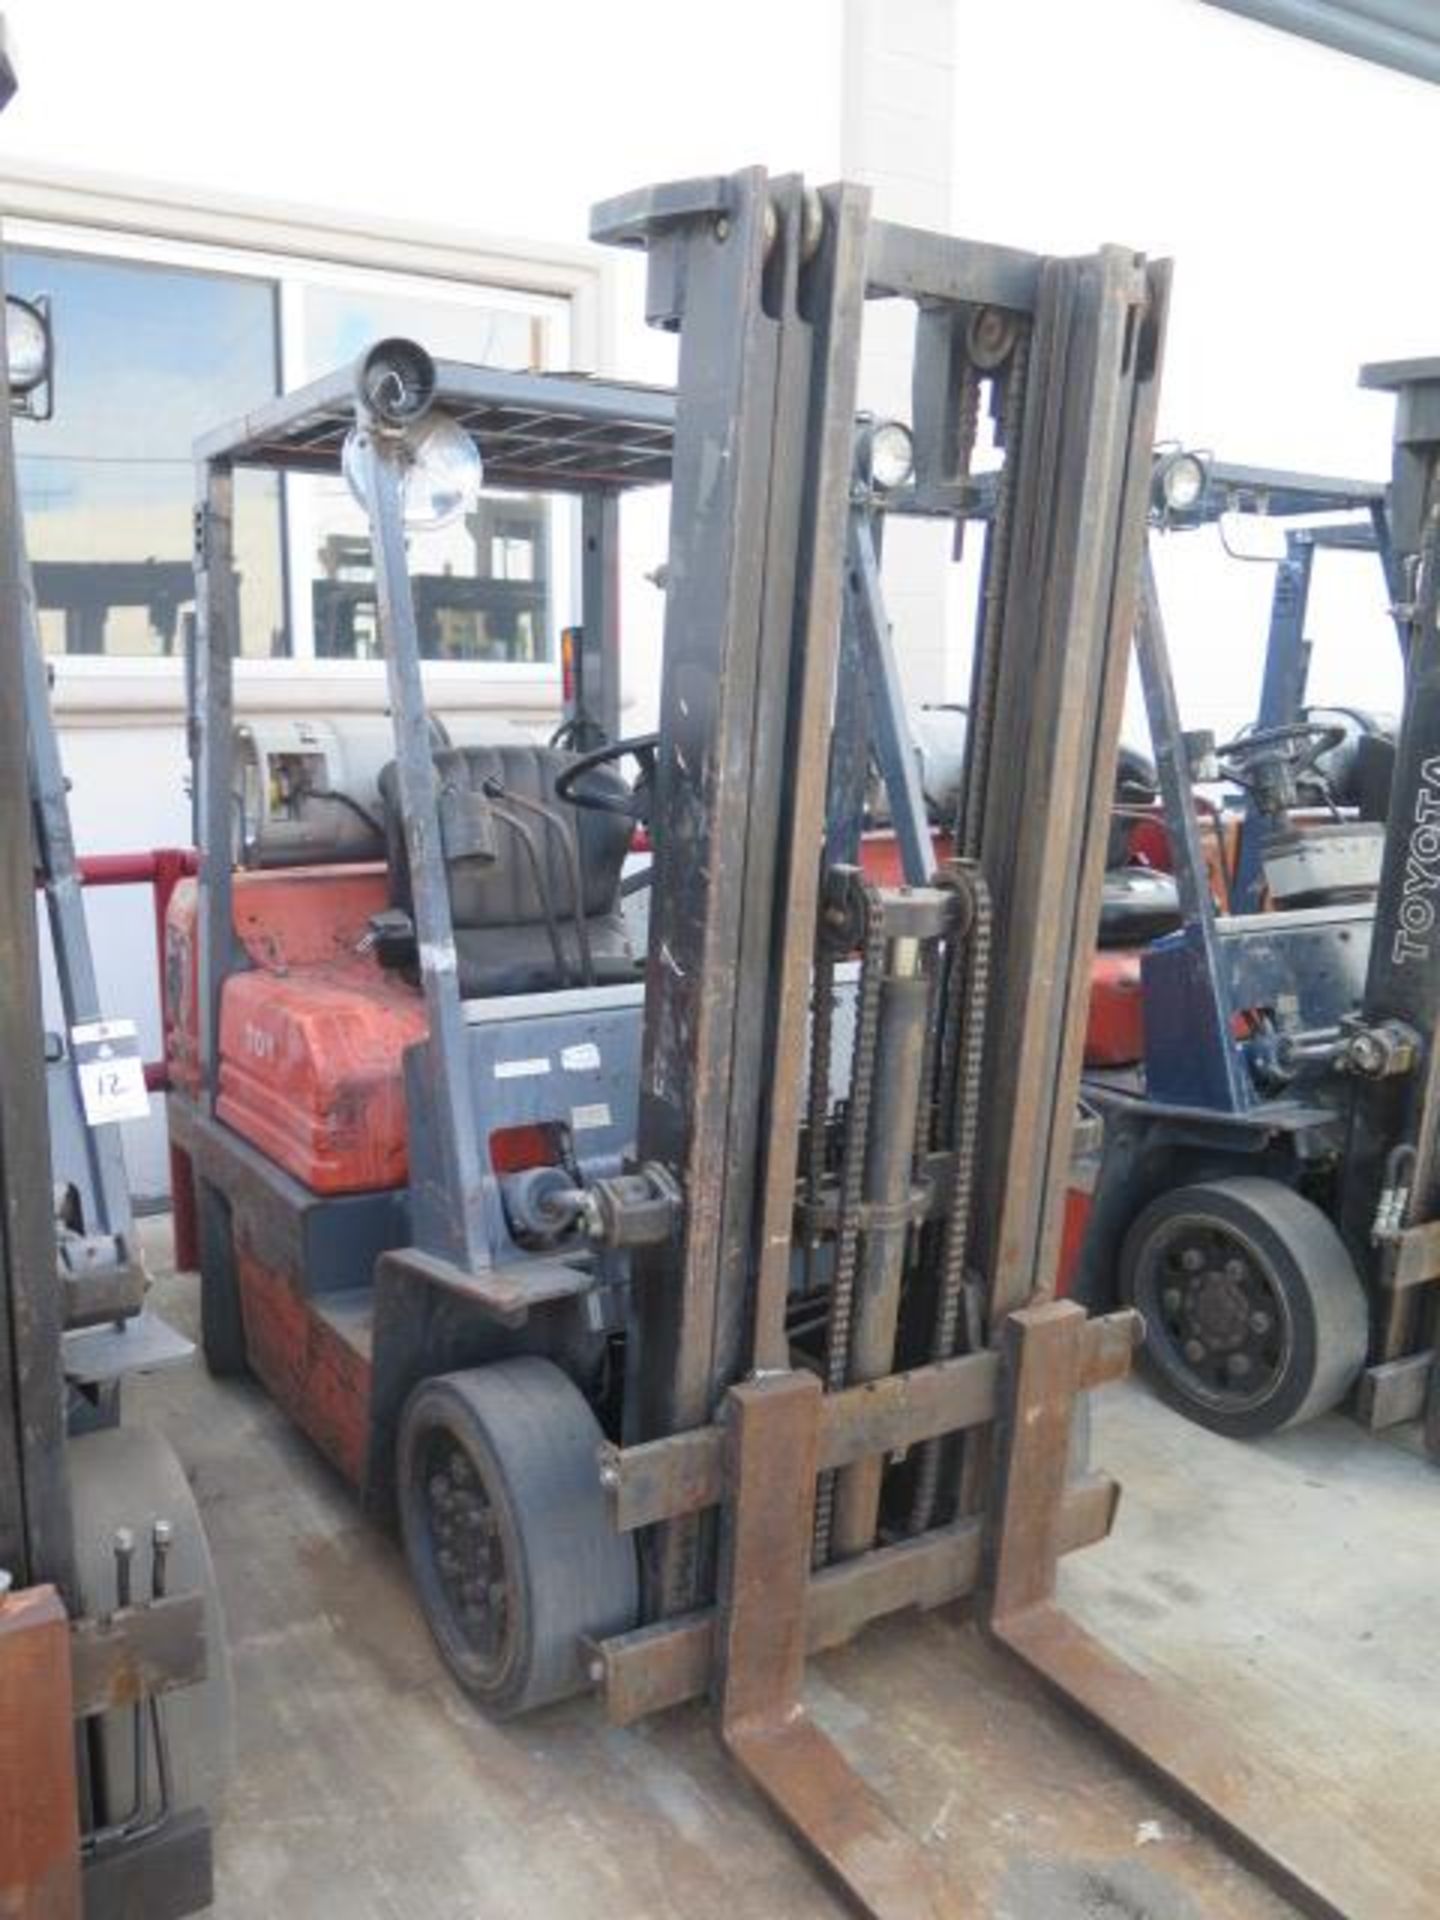 Toyota 5FGC25 5000 Lb Cap LPG Forklift s/n 85256 w/ 3-Stage Mast, 185" Lift Height, Cushion Tires, - Image 2 of 12